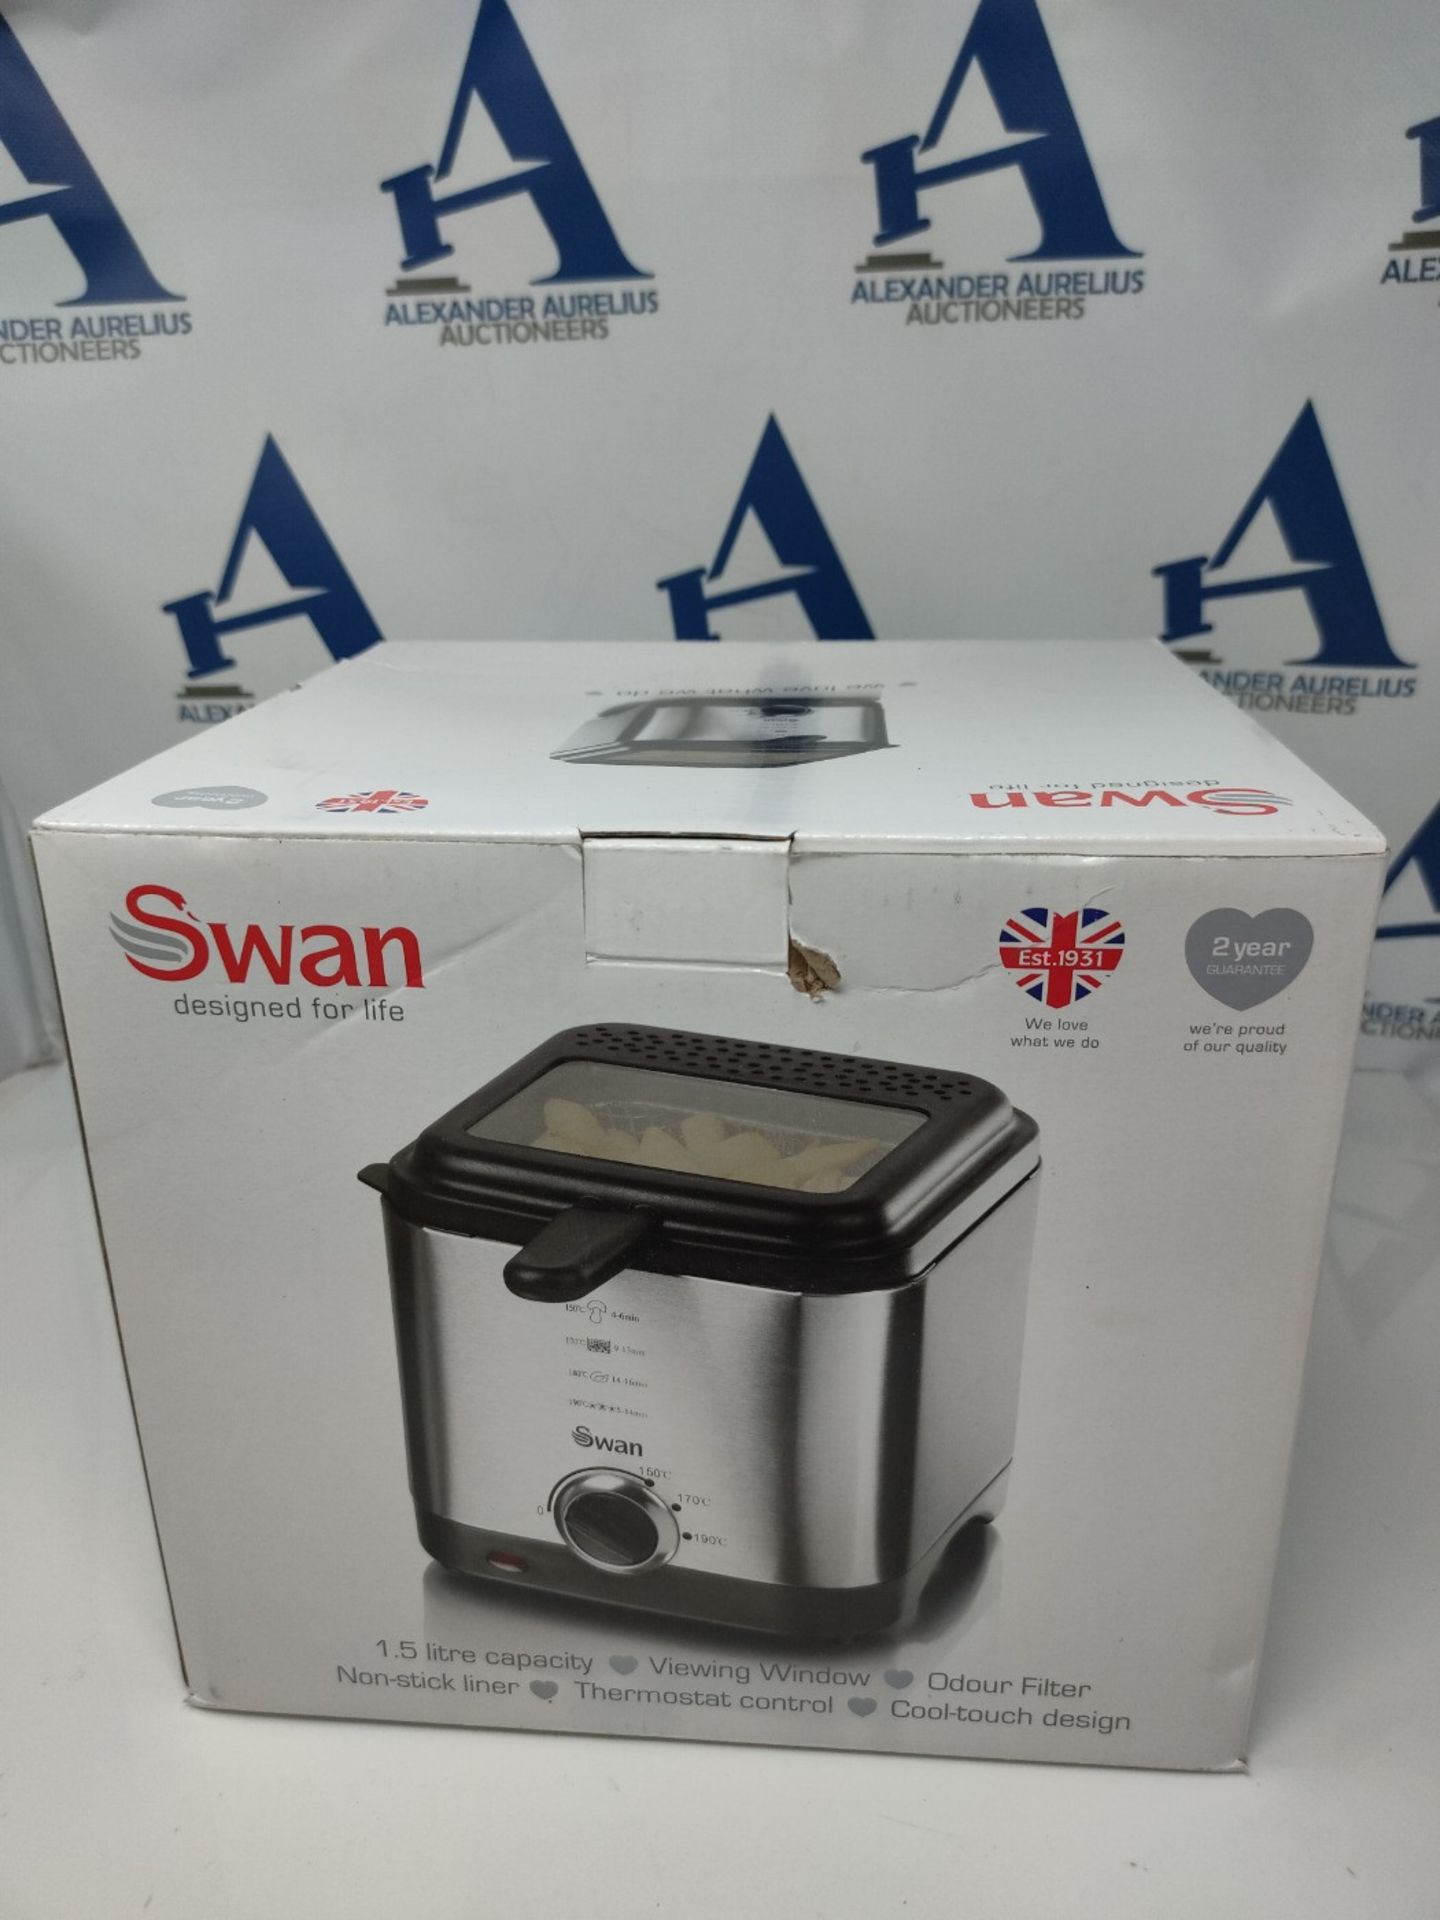 Swan 1.5 litre Stainless Steel Fryer with Viewing Window, Easy Clean and Adjustable Te - Image 2 of 3